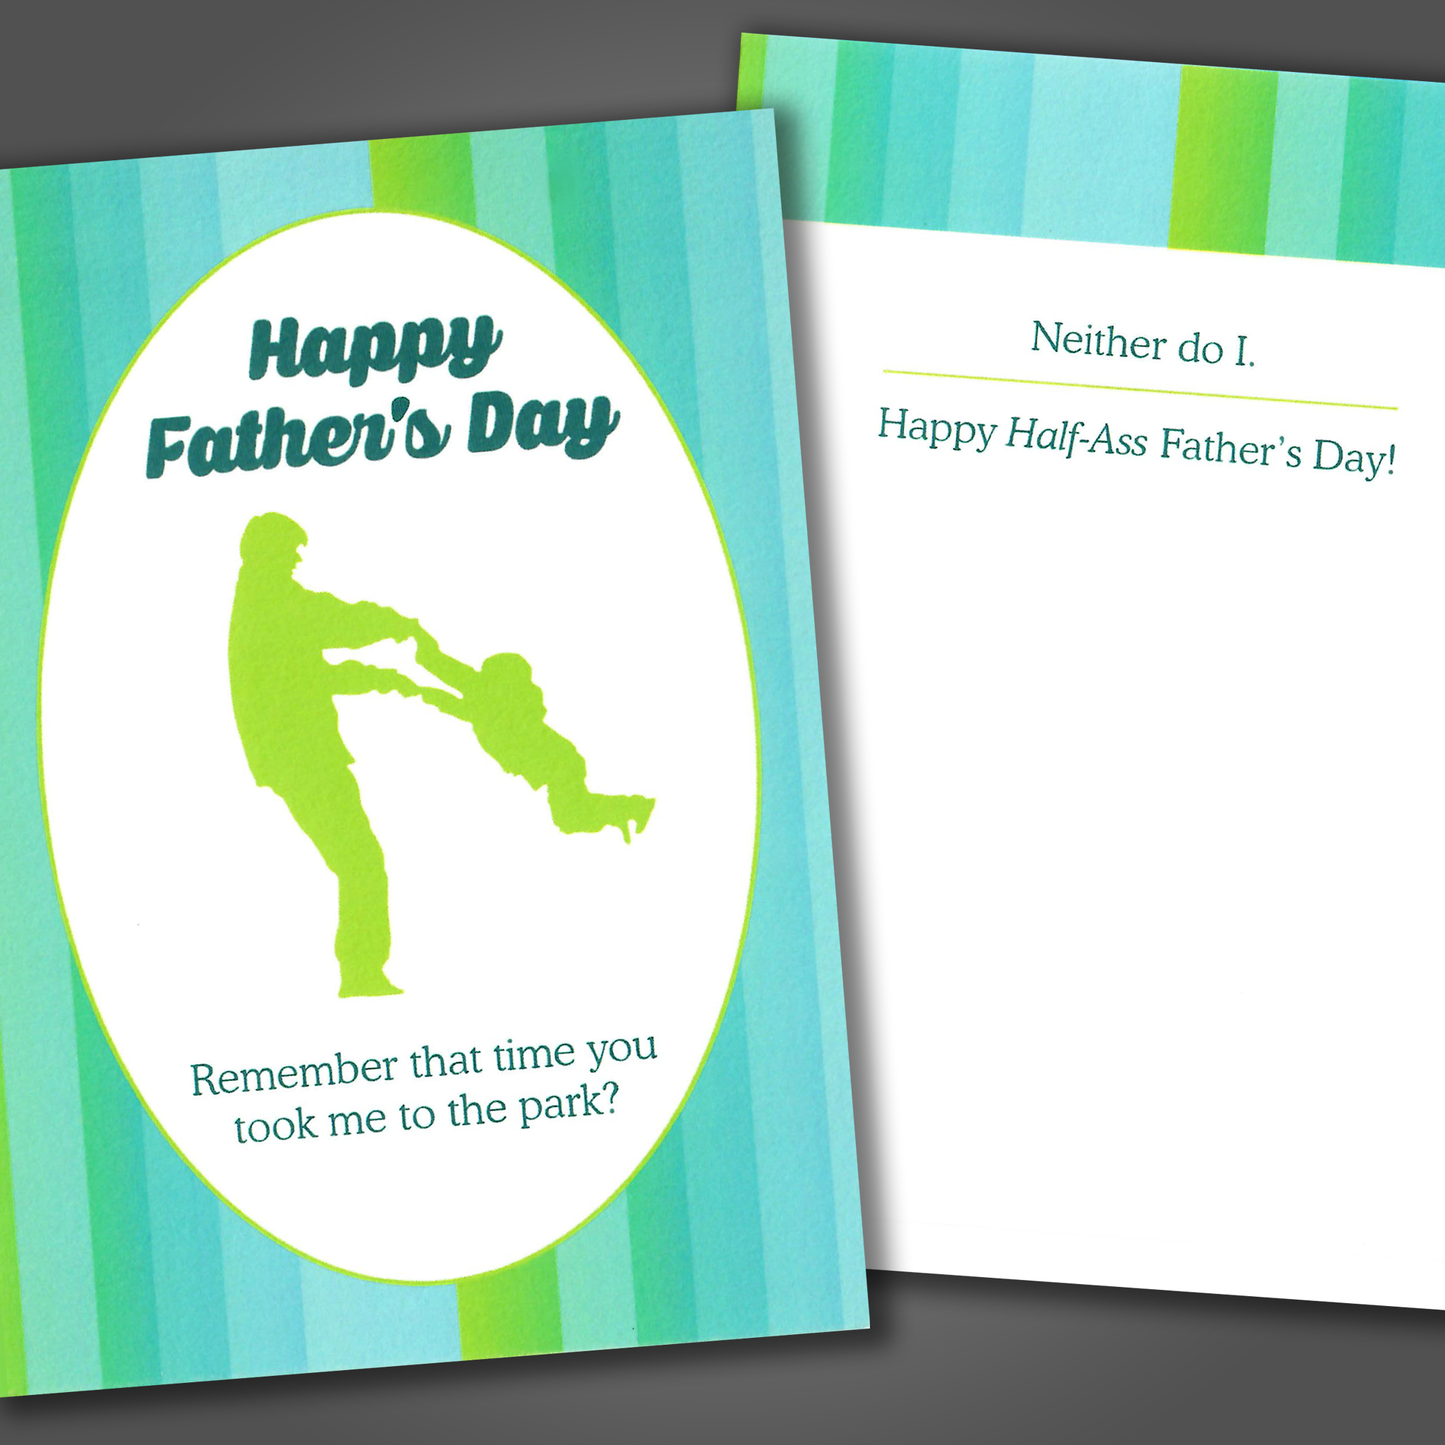 Funny happy father's day card with a child and dad playing at a park drawn on the front of the card. Inside the card is a funny joke that says happy half-ass father's day!